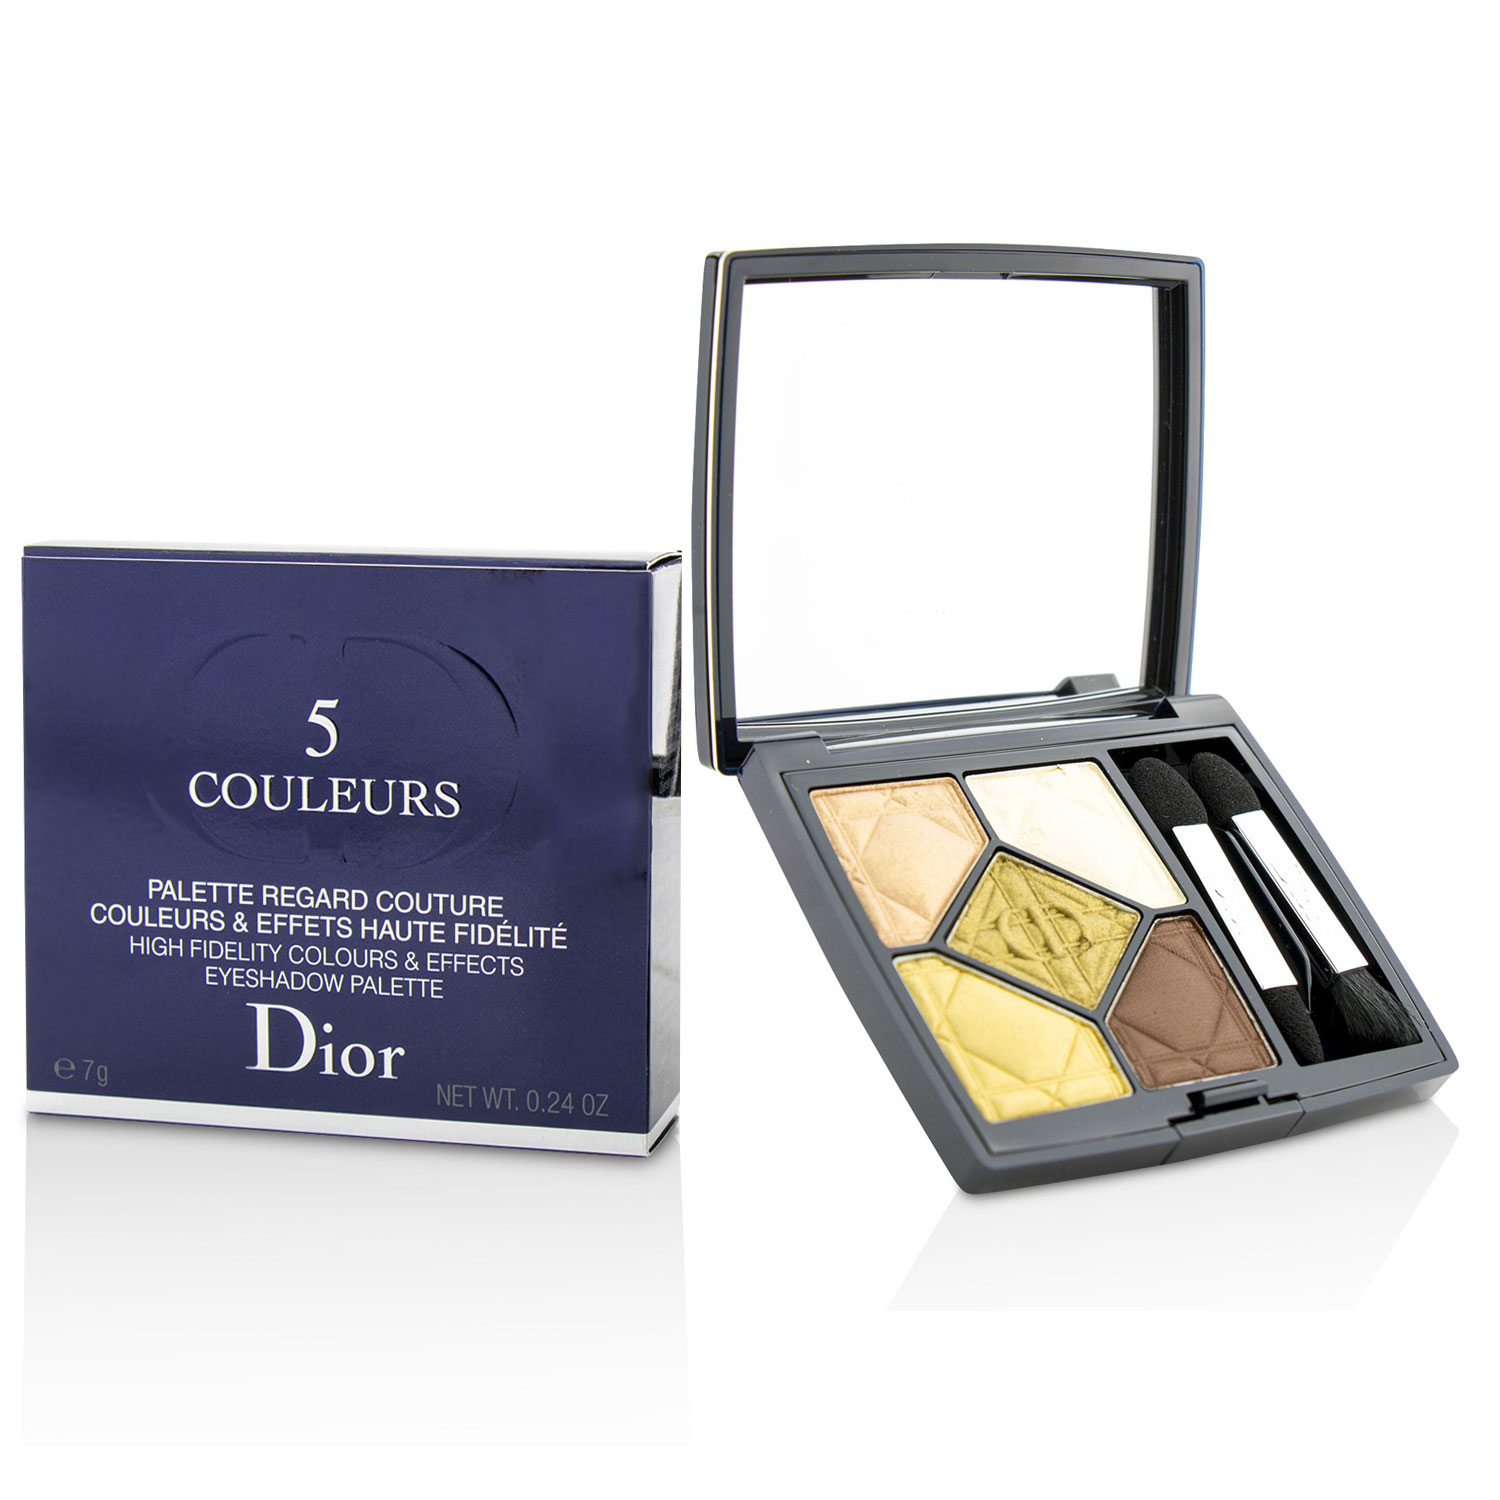 5 Couleurs High Fidelity Colors & Effects Eyeshadow Palette - # 657 Expose Christian Dior Image